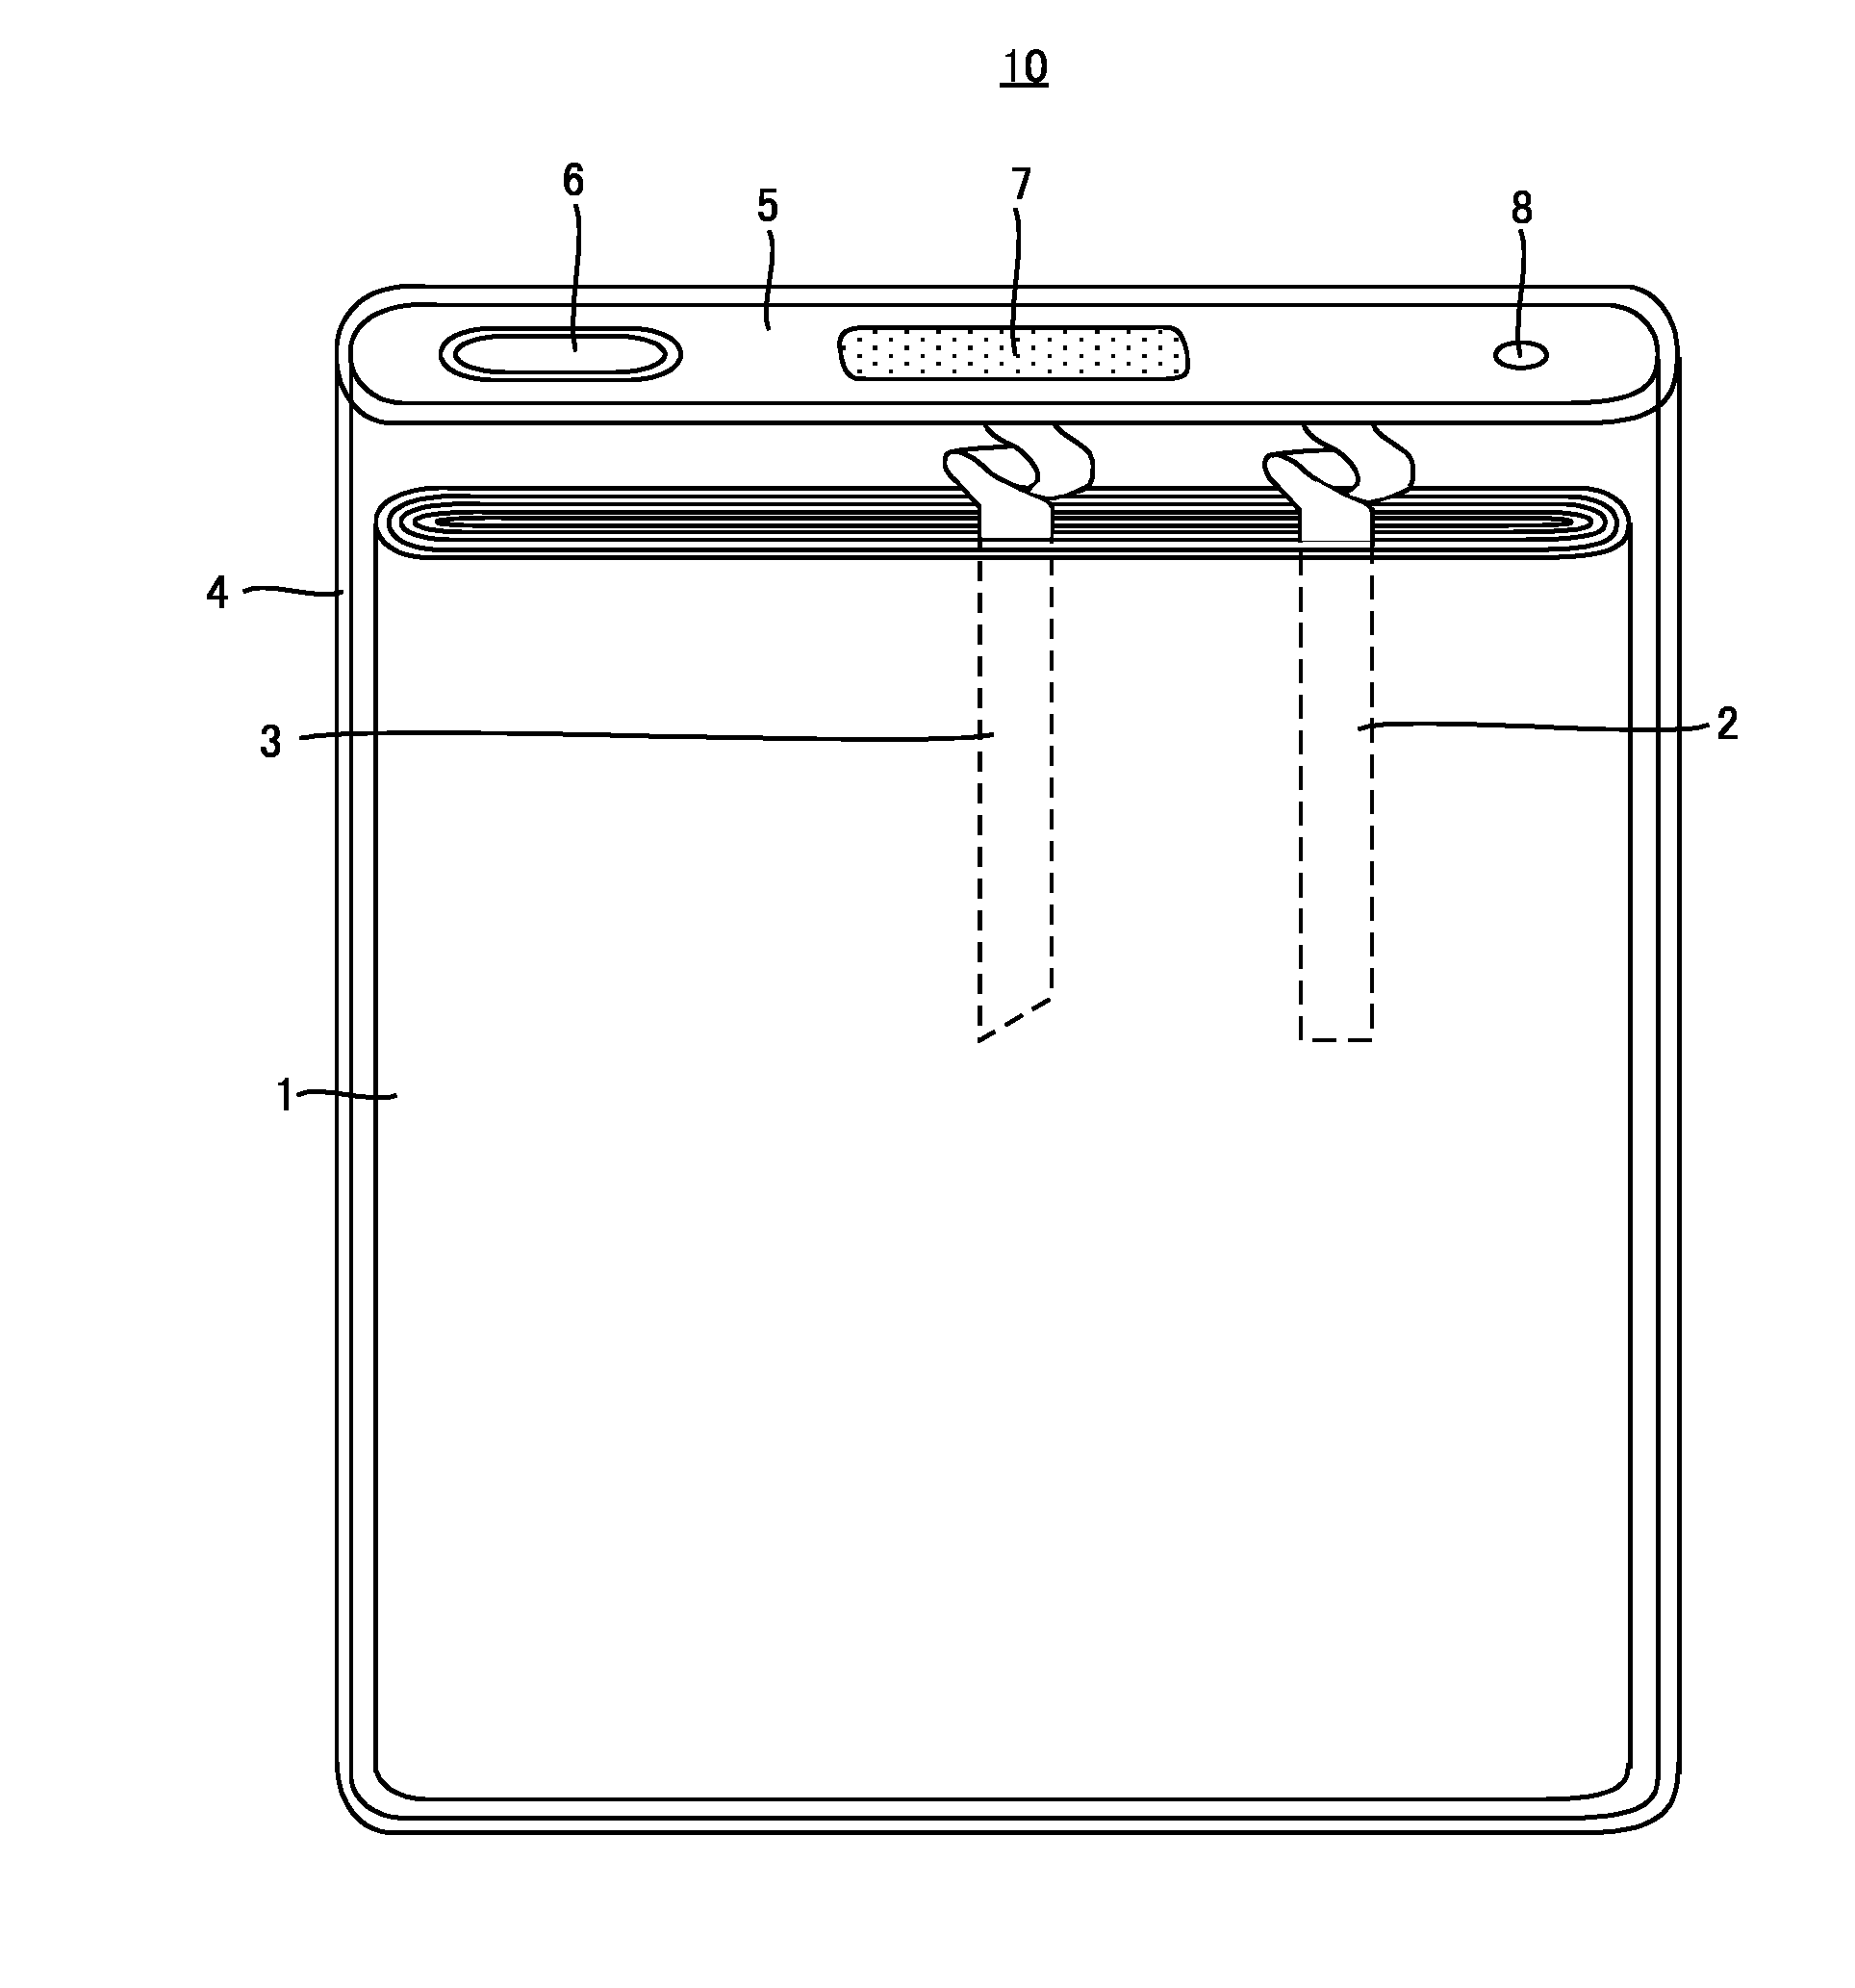 Lithium-ion secondary battery